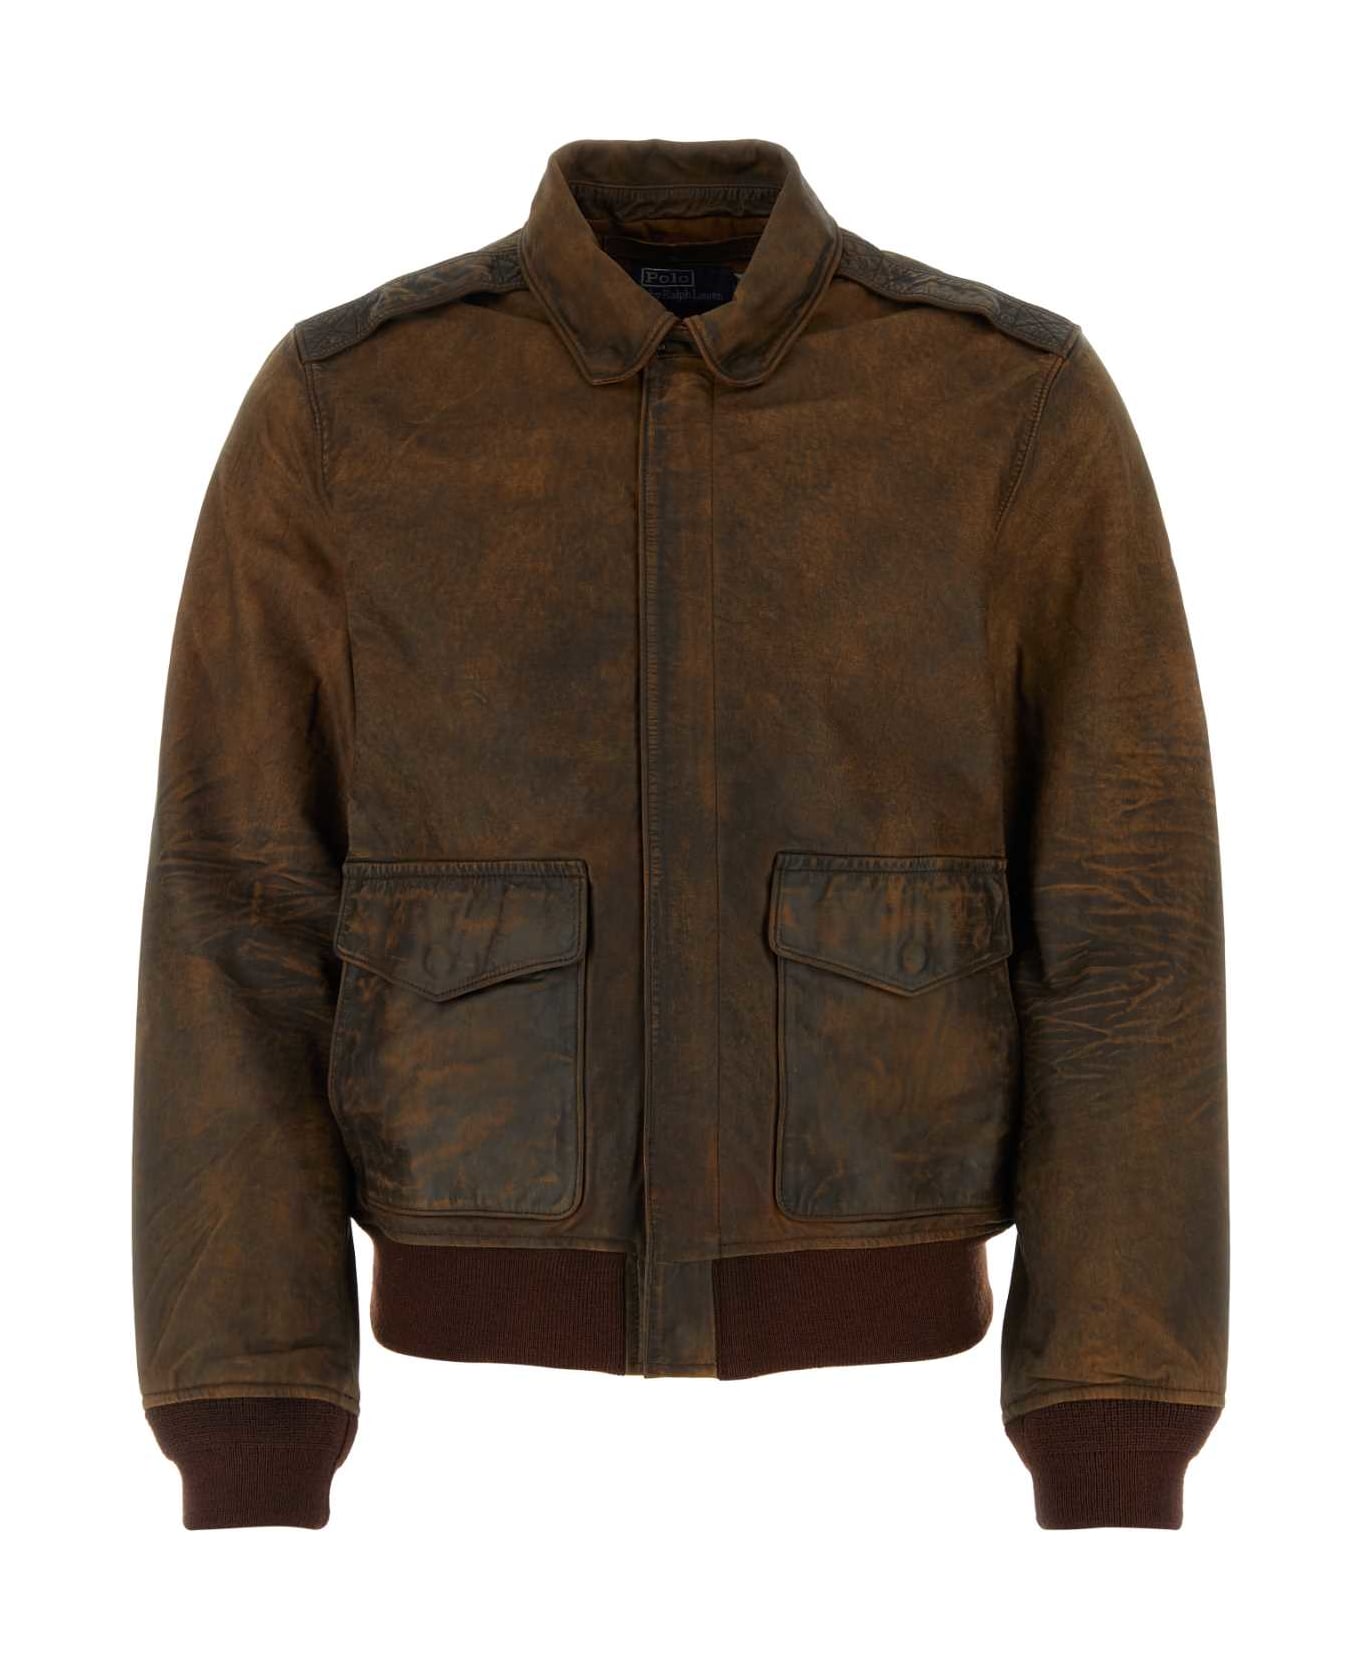 Polo Ralph Lauren Mud Leather Bomber Jacket - BROWNE